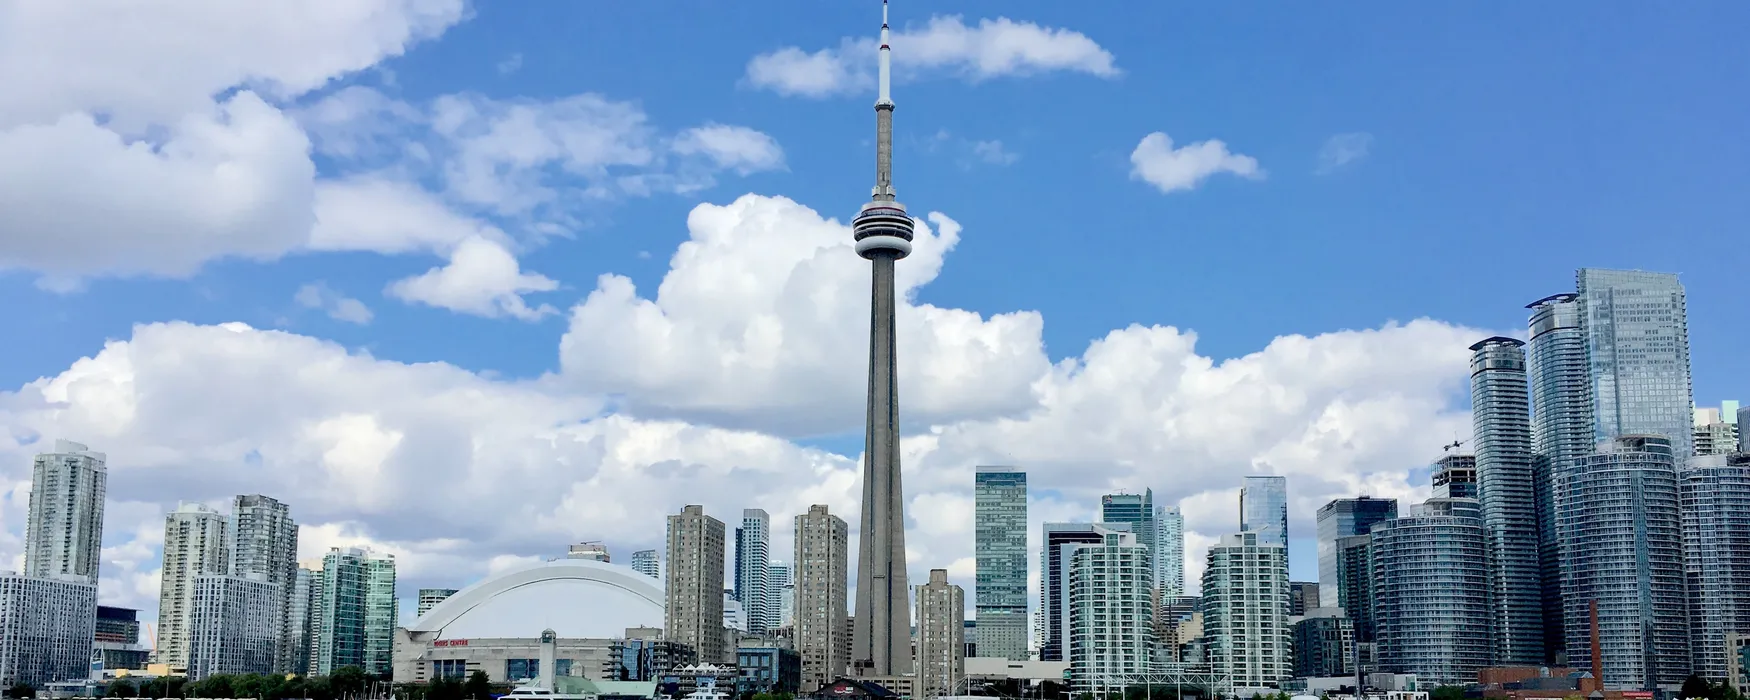 Things to do in Toronto: catch this amazing skyline view